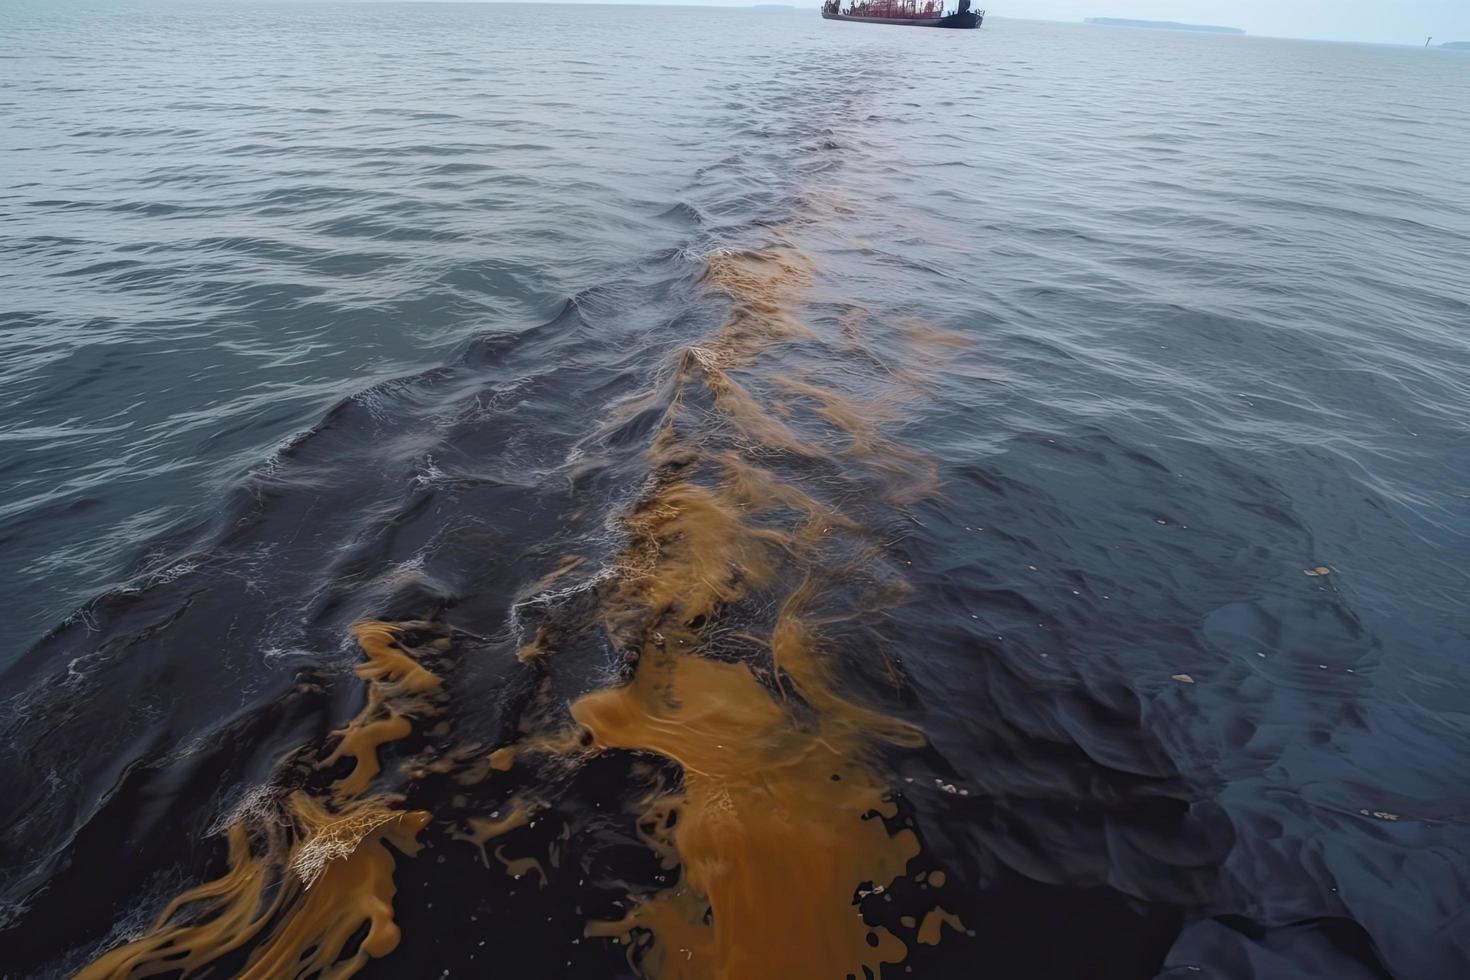 Oil leak from Ship , Oil spill pollution polluted water surface. water pollution as a result of human activities photo